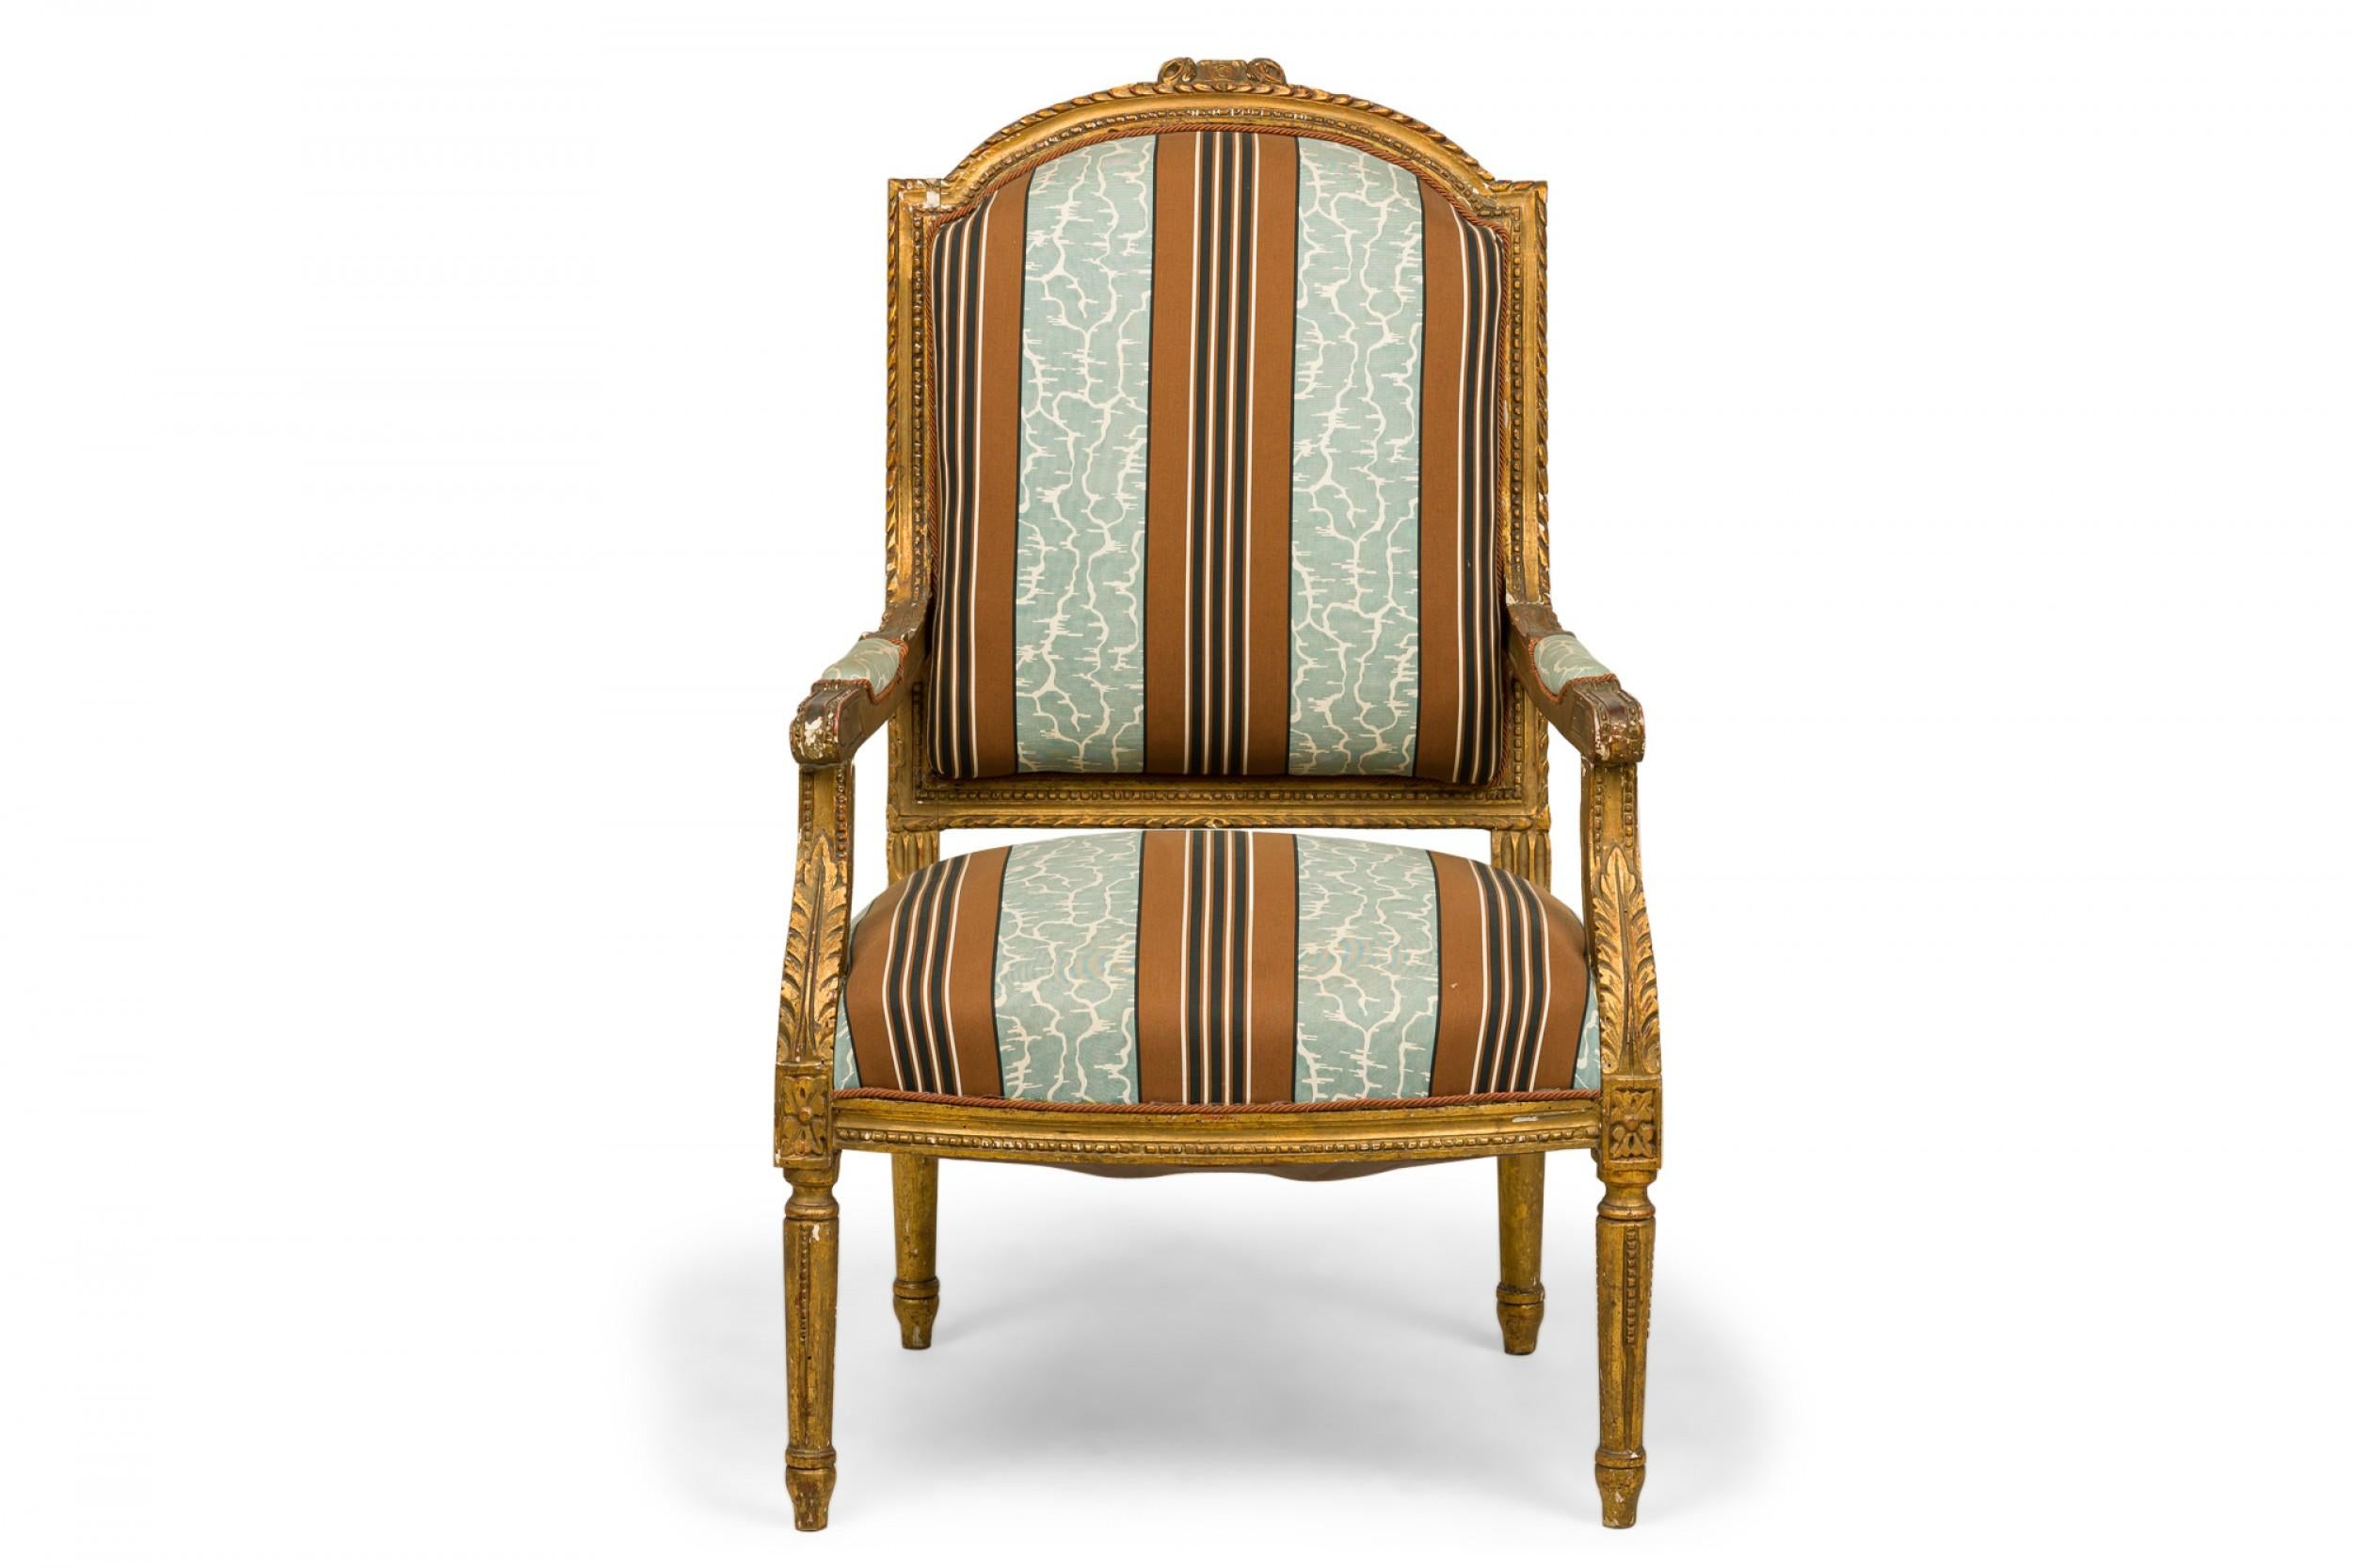 French Louis XVI-style (20th Century) armchairs with carved giltwood frames and seats and backs upholstered in a broad striped light blue, rust red, and black fabric. (PRICED AS PAIR).